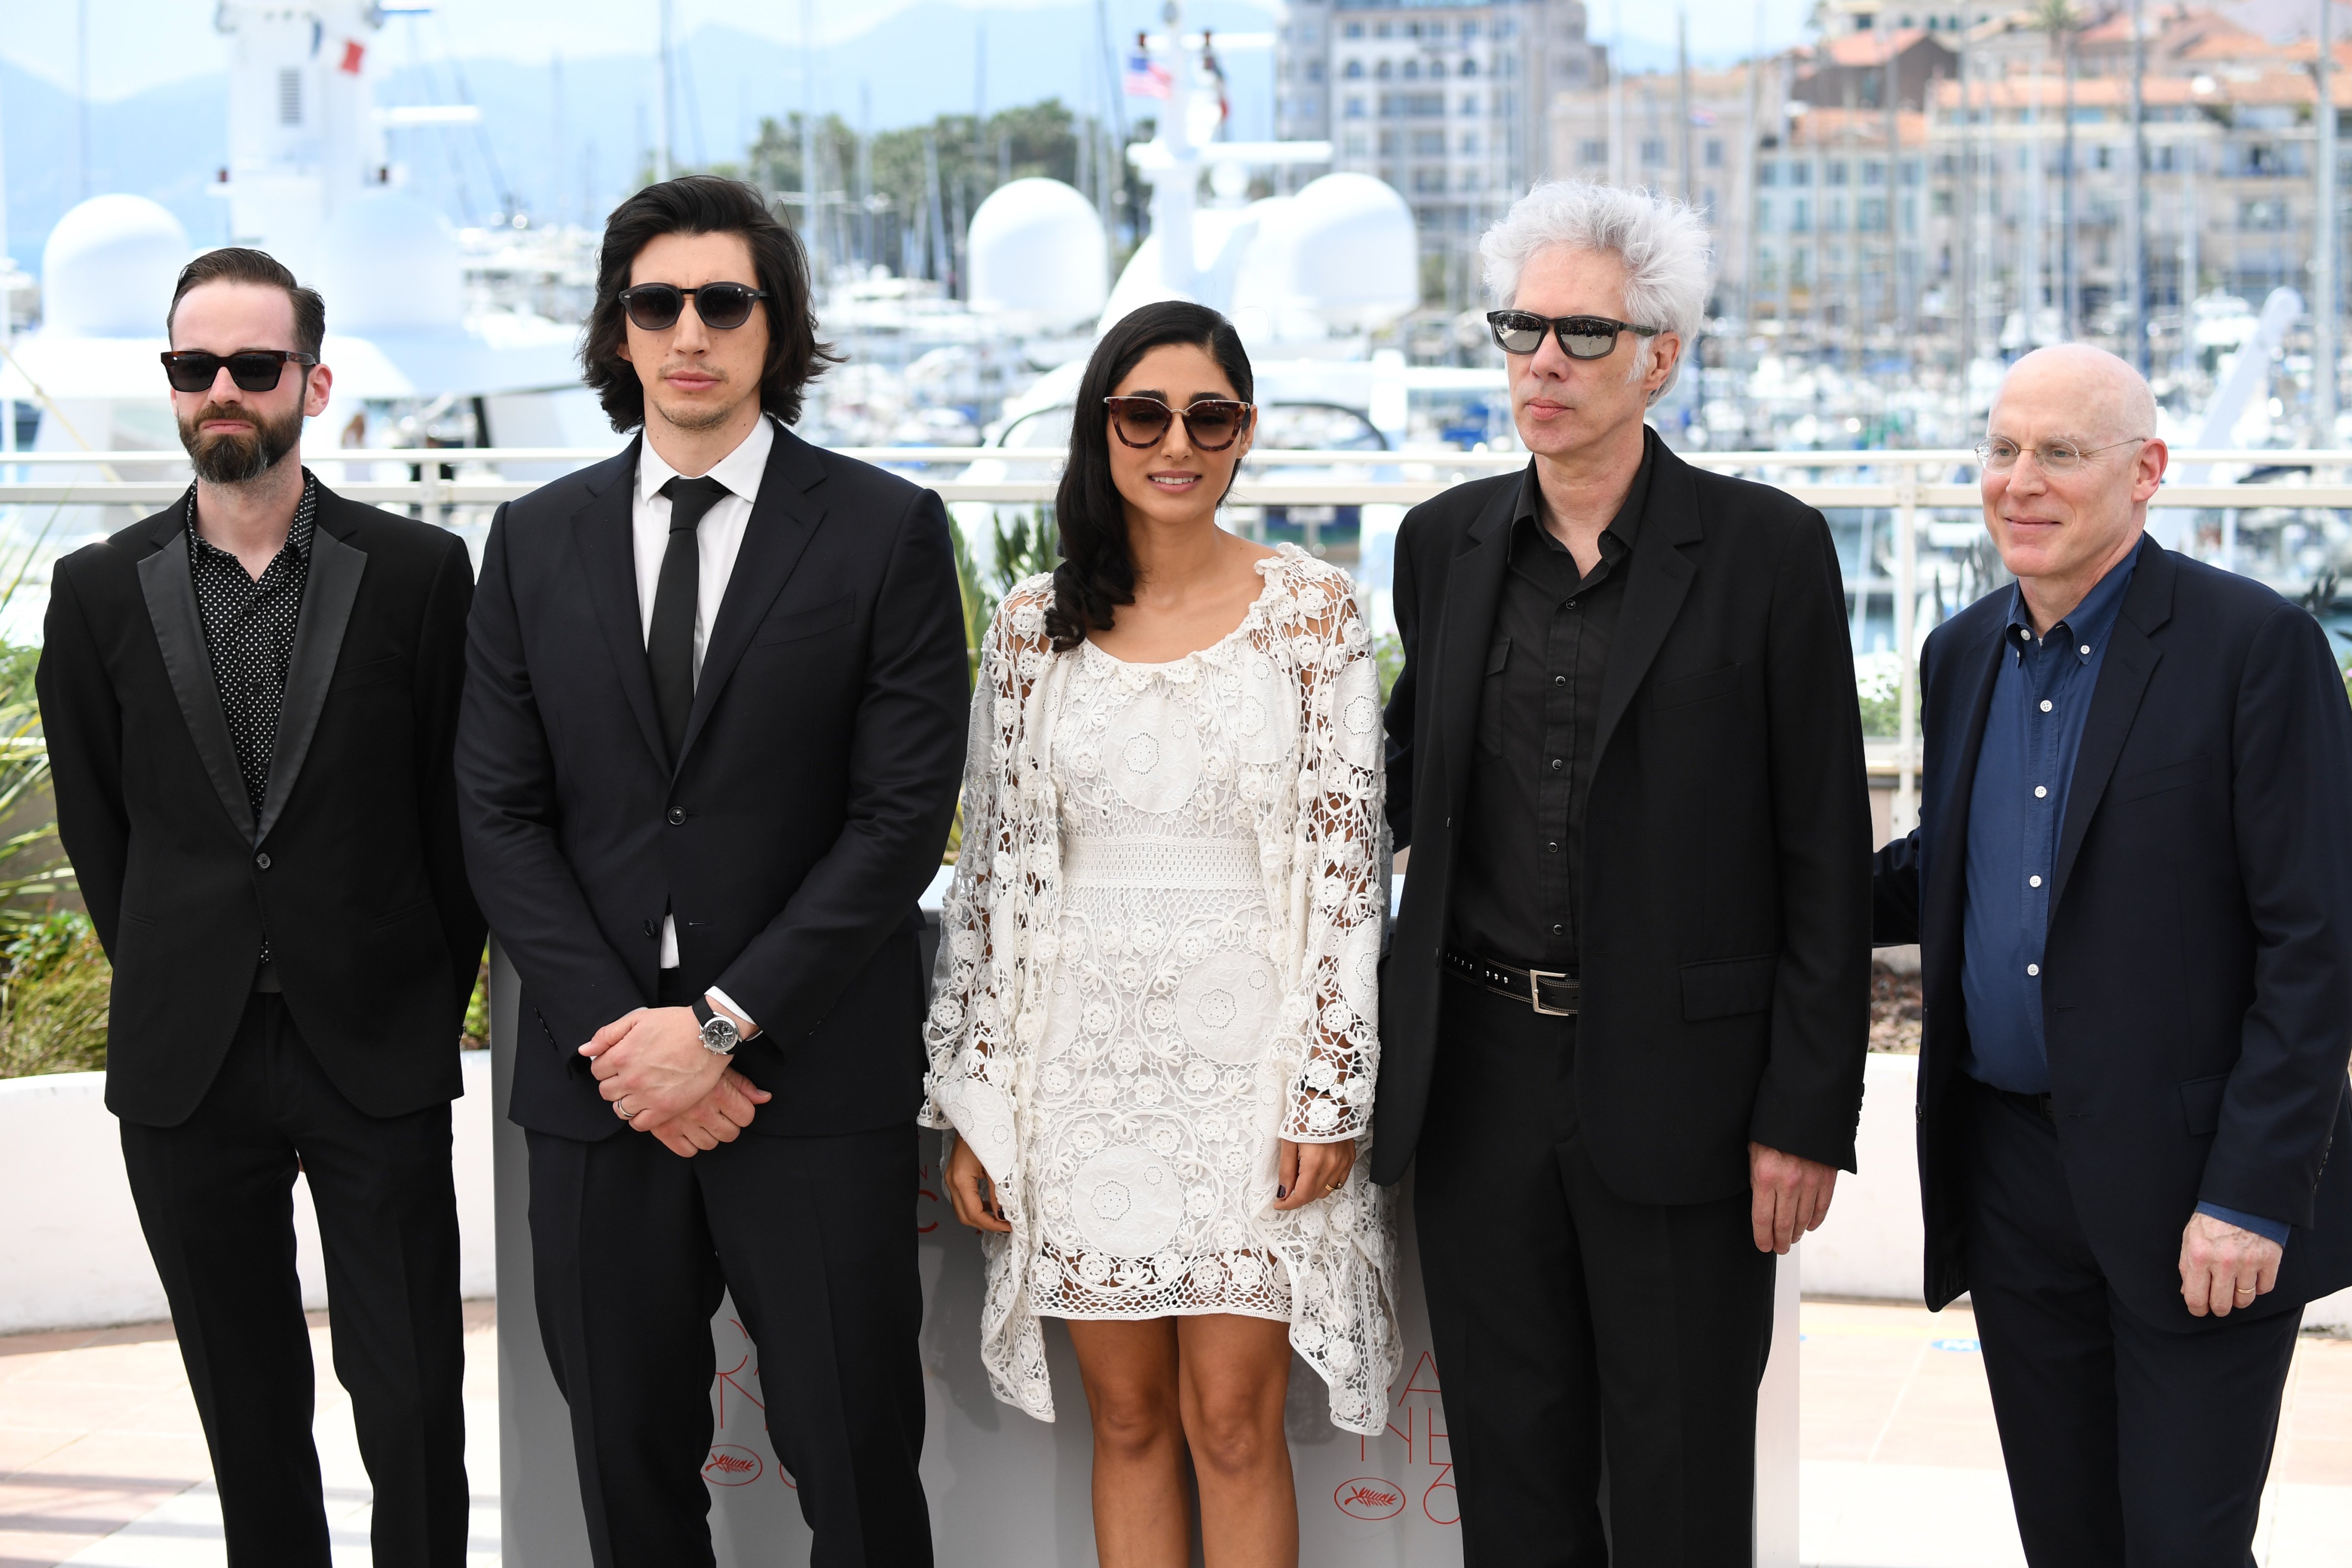 From left: Carter Logan, Adam Driver, Golshifteh Farahani, Jim Jarmusch, and Joshua Astrachan during the 69th annual Cannes Film Festival on May 16, 2016 in Cannes, France. (Venturelli/Getty Images)